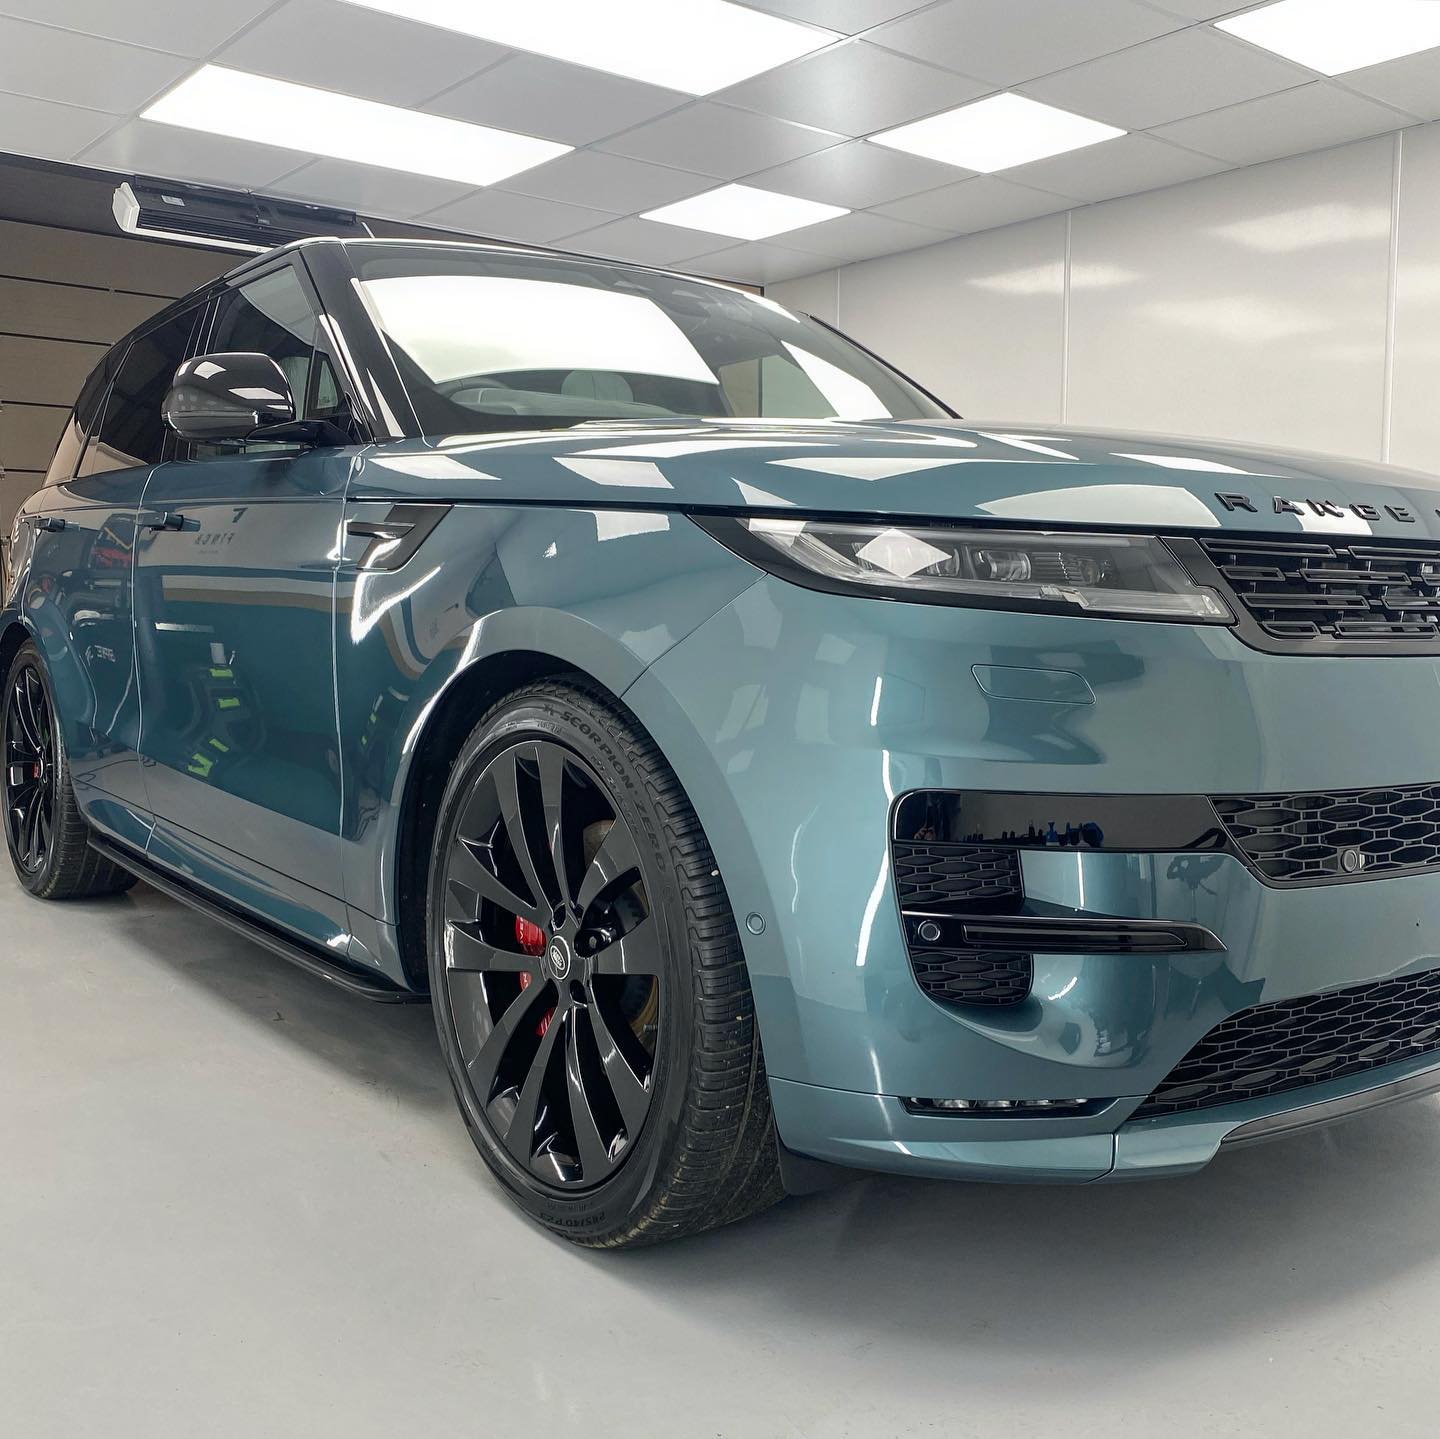 A blue range rover sport with black wheels parked indoors.